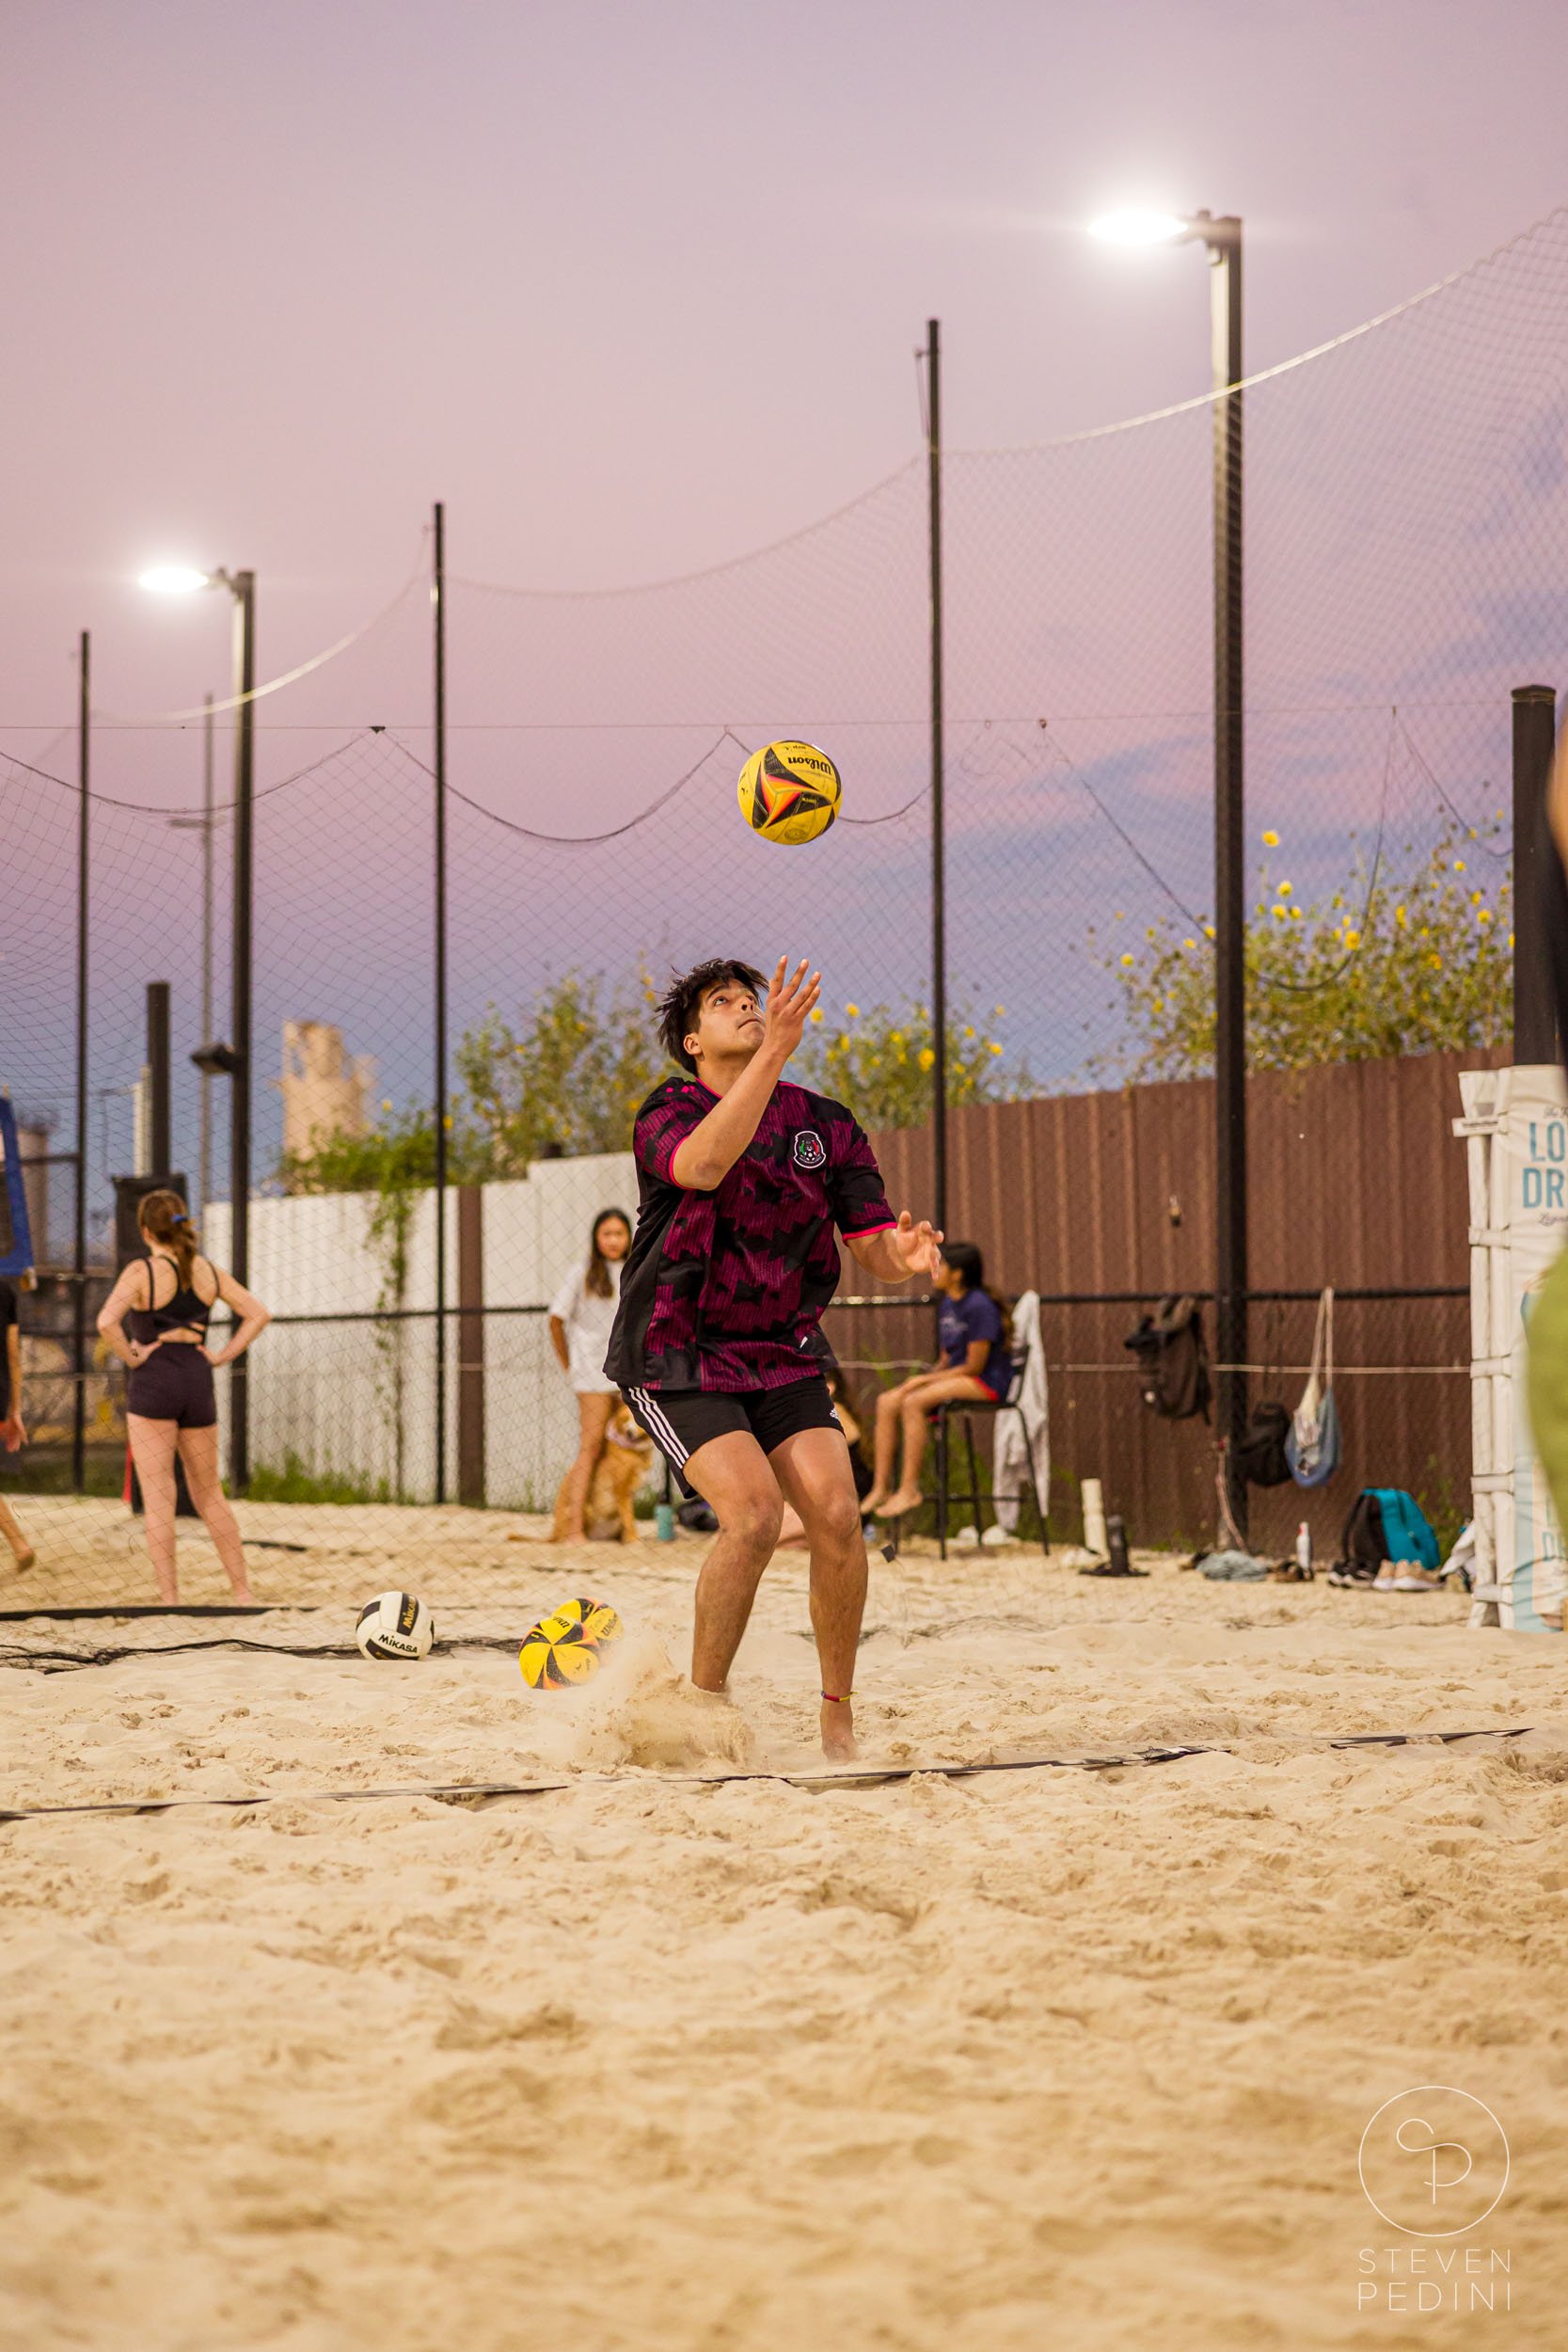 Steven Pedini Photography - Bumpy Pickle - Sand Volleyball - Houston TX - World Cup of Volleyball - 00283.jpg